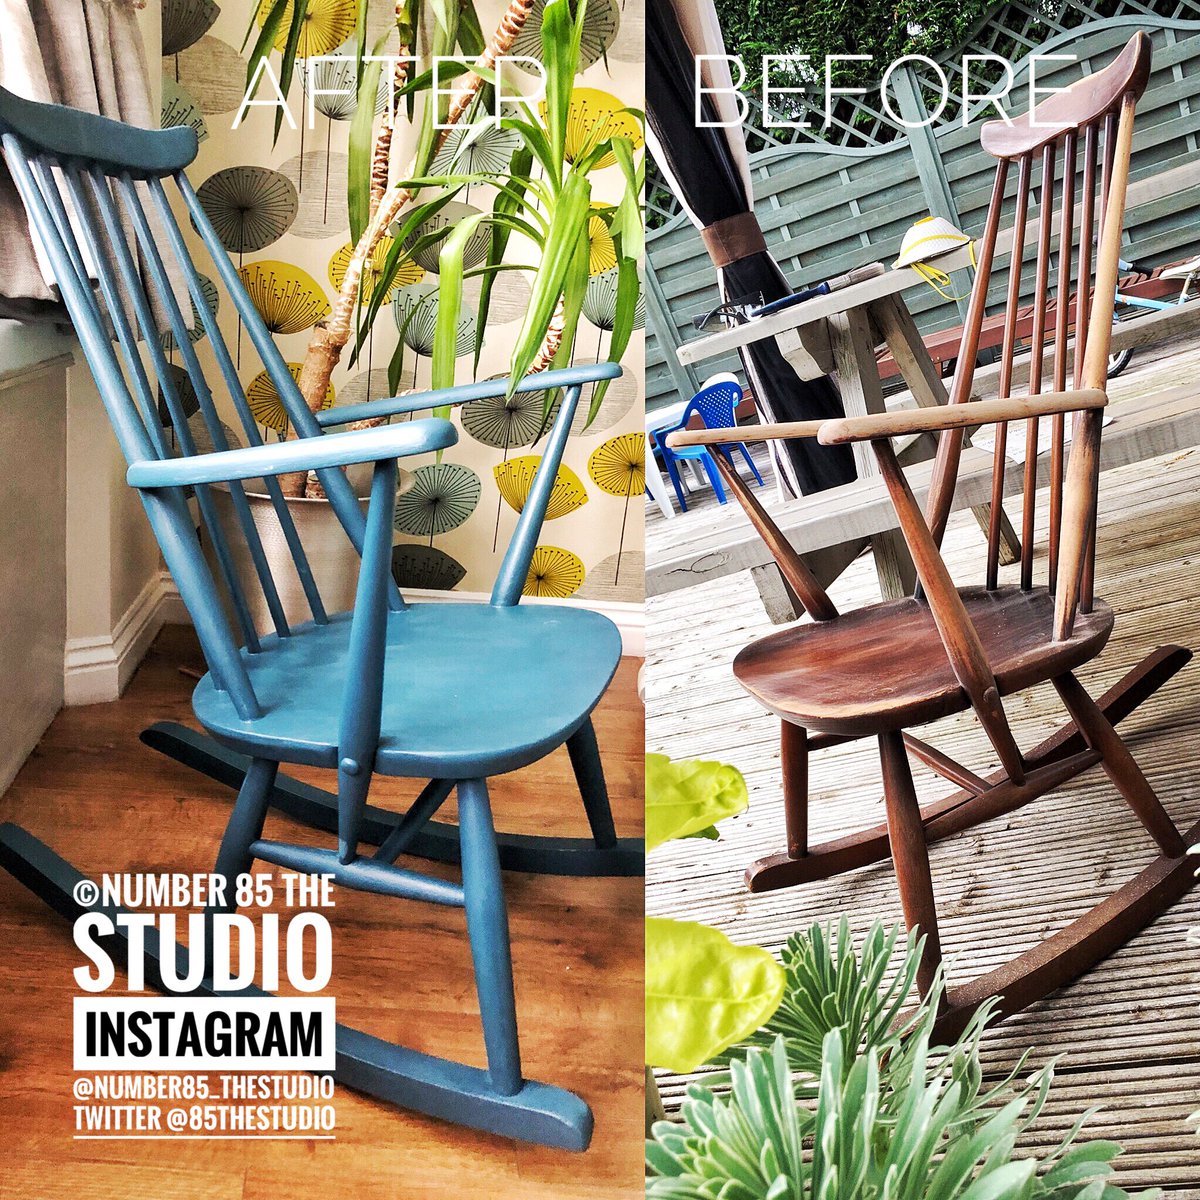 Hello #brumhour @BrumHour from @85TheStudio can’t get to #studio due to the snow so a before / after of the latest #project an @Ercol_Furniture #rocking #chair in @AnnieSloanHome blue more on #etsy page etsy.com/uk/shop/Number… or Instagram @number85_thestudio
#ercol #upcycle #pr